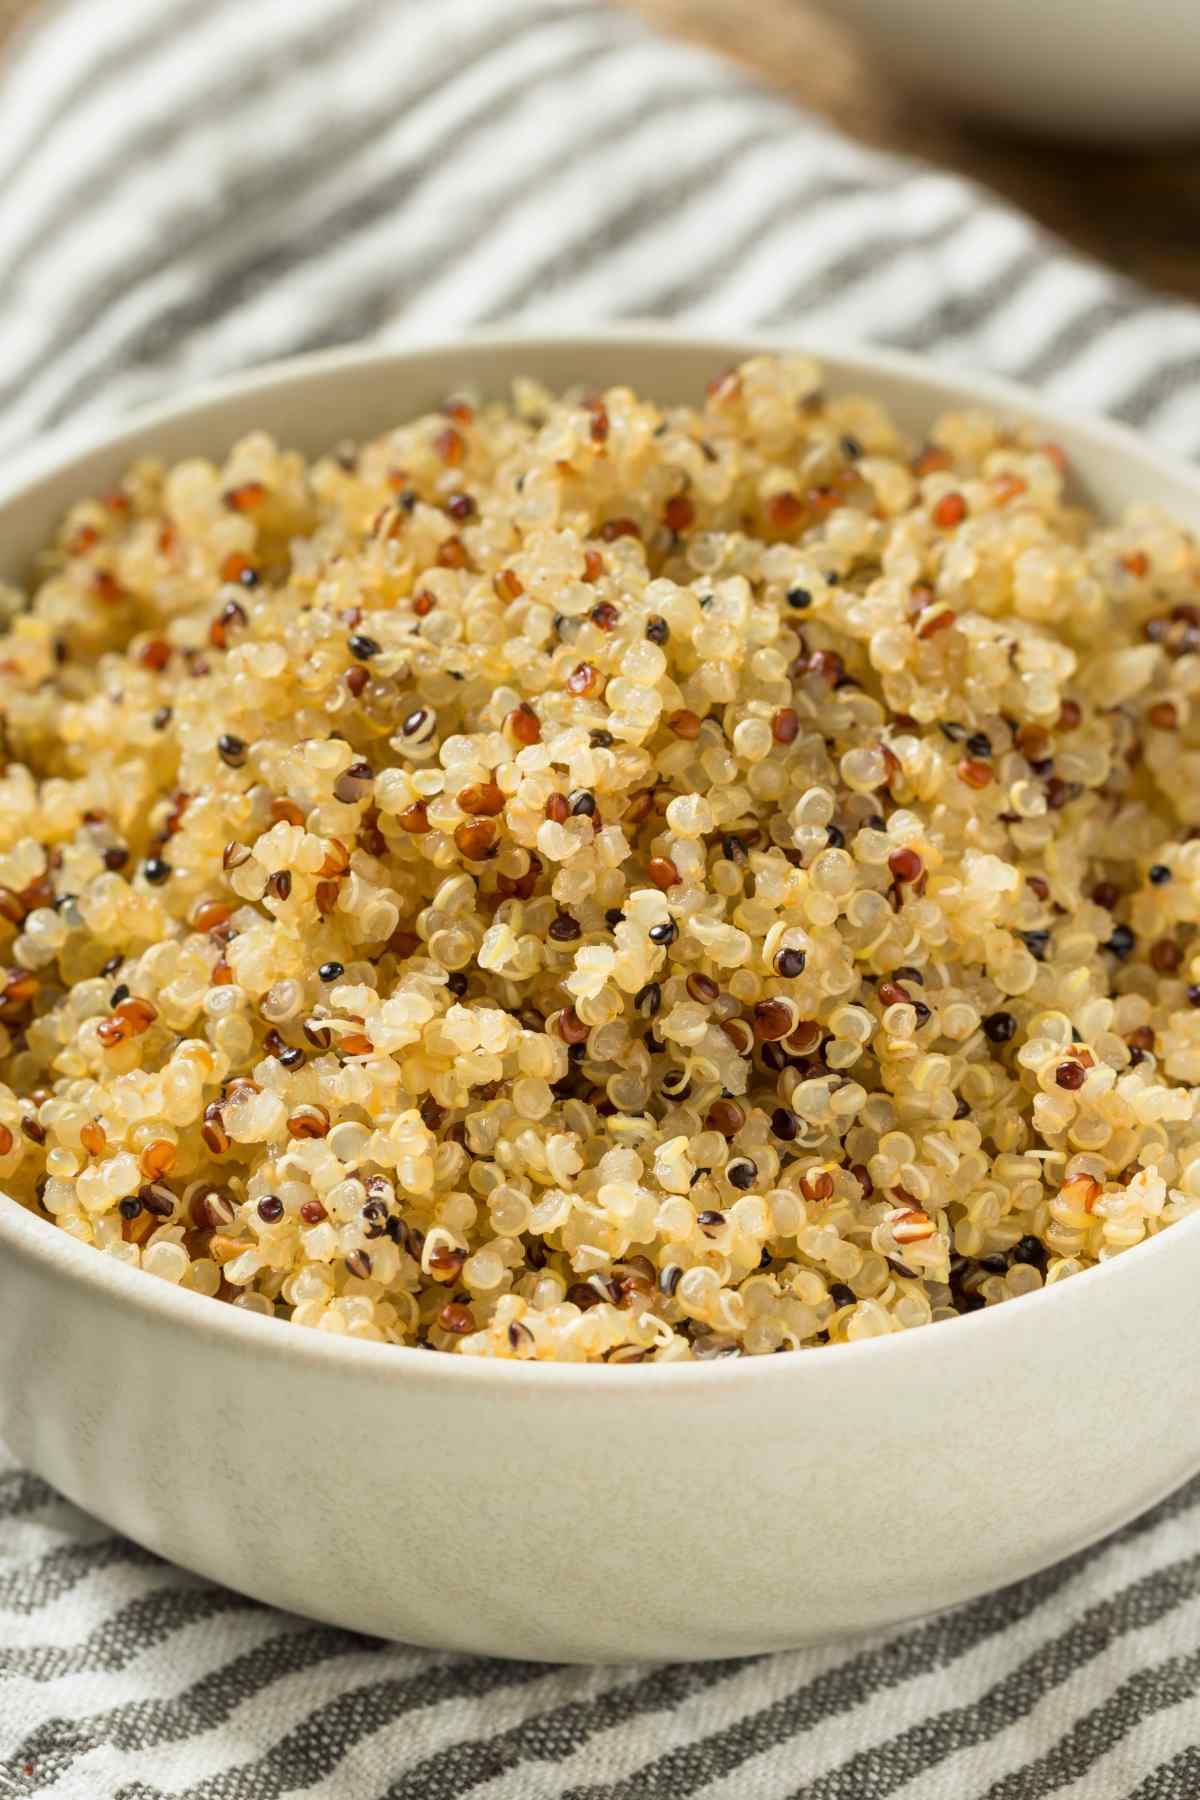 Is Quinoa Keto? Is it low in carbs? The keto diet is gaining traction these days. If you’re following a keto diet, then you’re probably interested to know which foods are low on carbs and keto-friendly. Quinoa is a healthy superfood, but can you eat it on a keto diet?